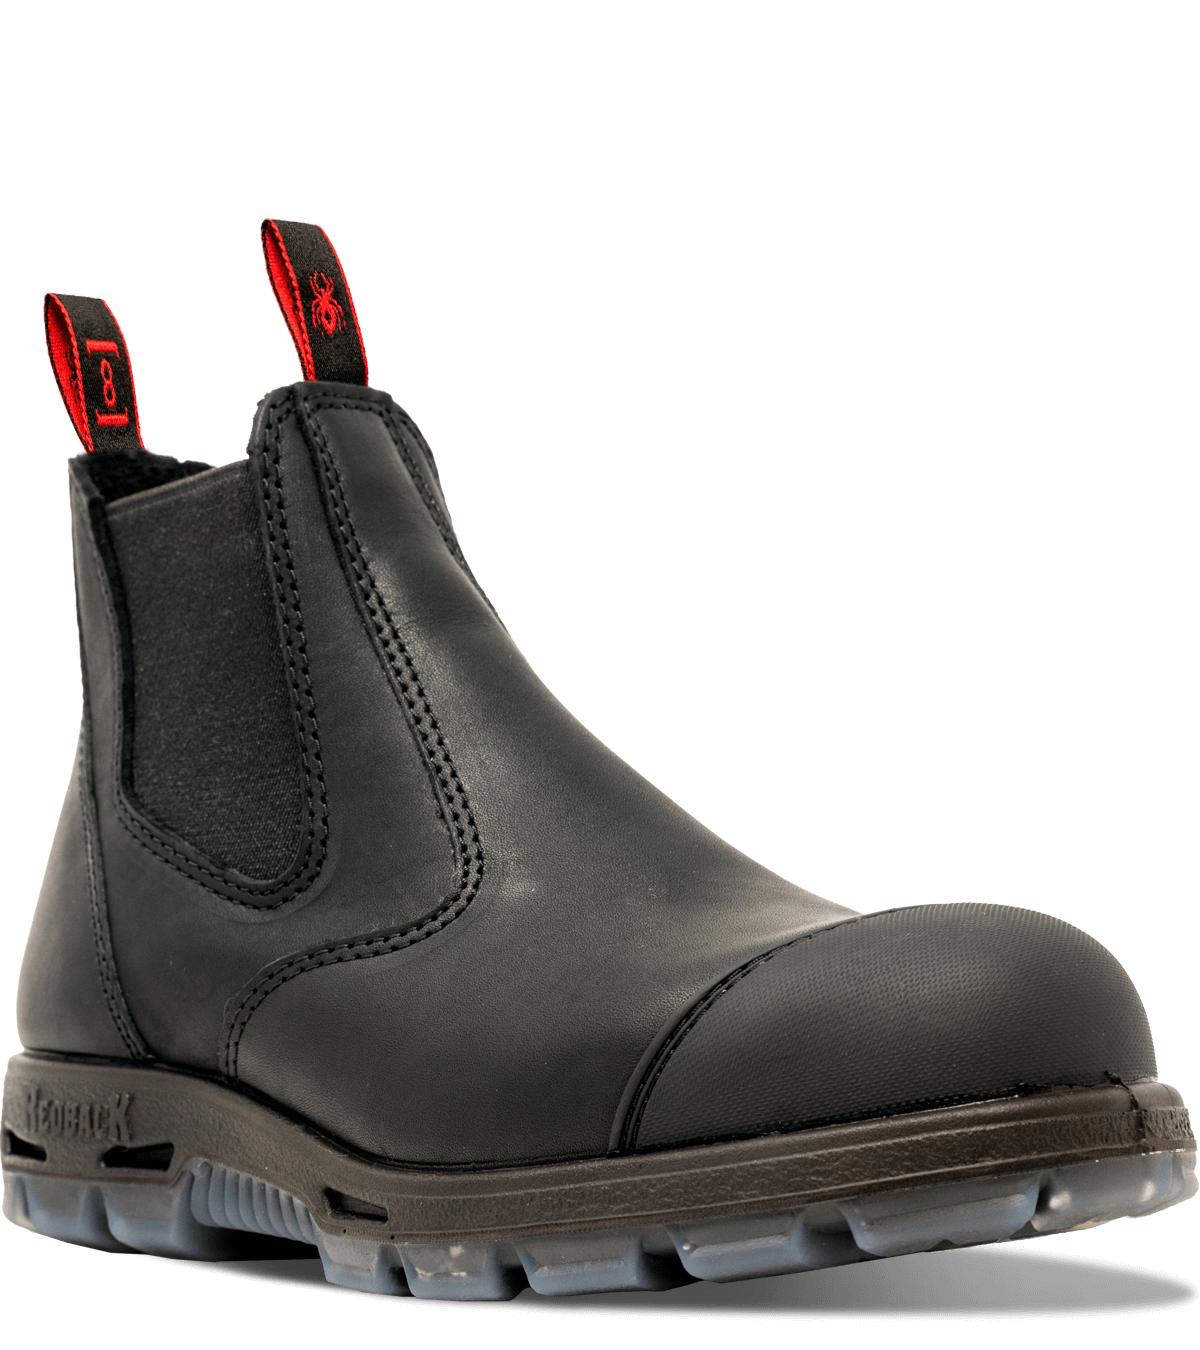 Redback safety HD boot